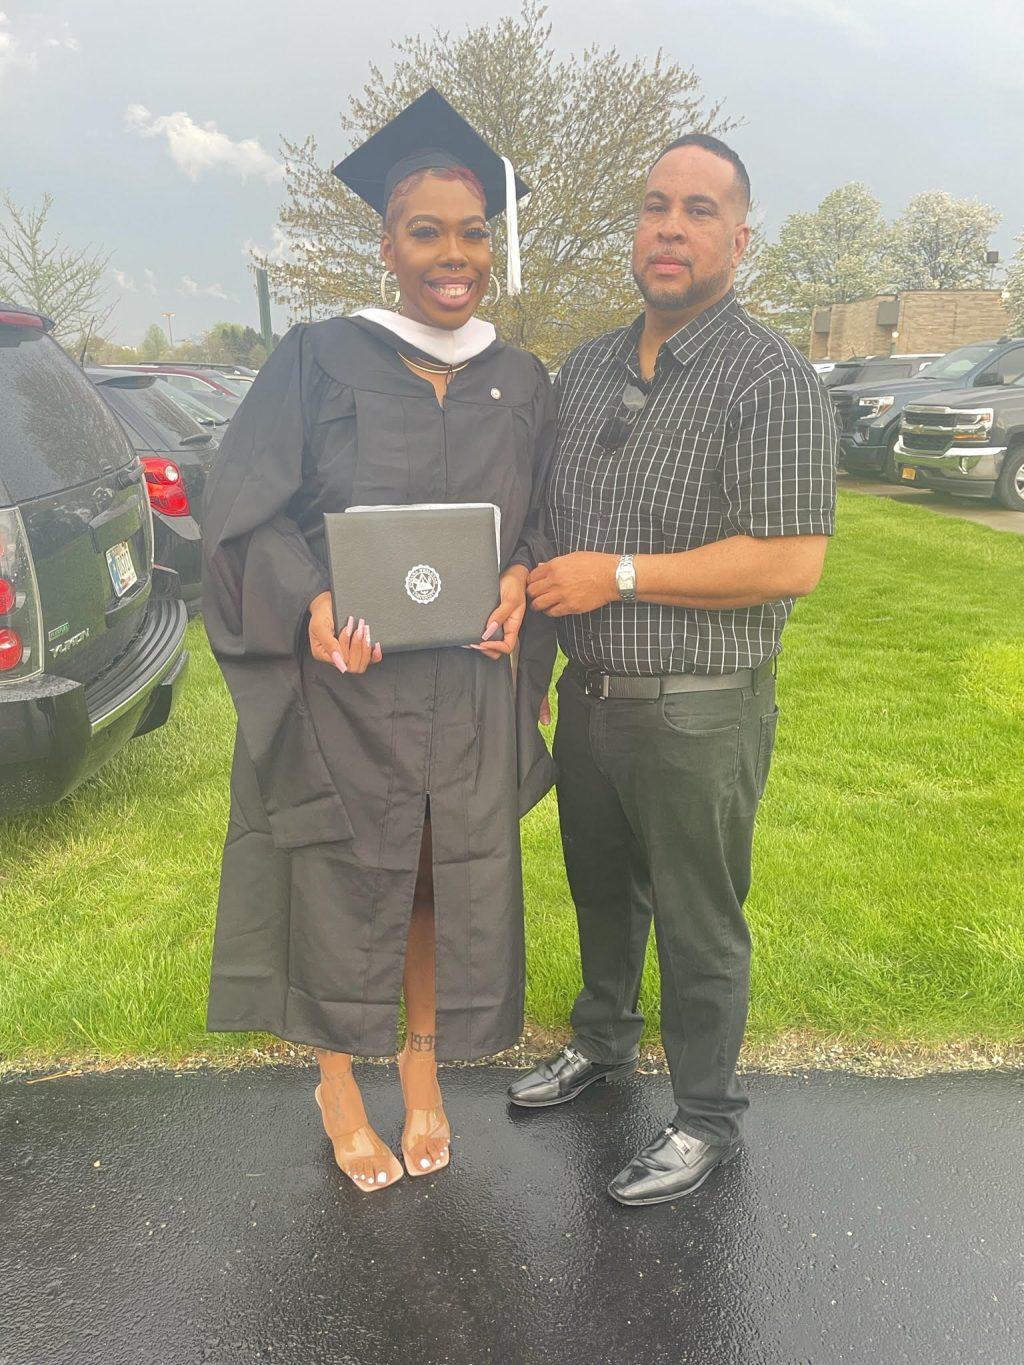 Shelbi Chandler stands with her father on the day of her graduation at Indiana Wesleyan University on April 30, 2022. Chandler said her father demonstrated the importance of resistance. Photo courtesy of Shelbi Chandler